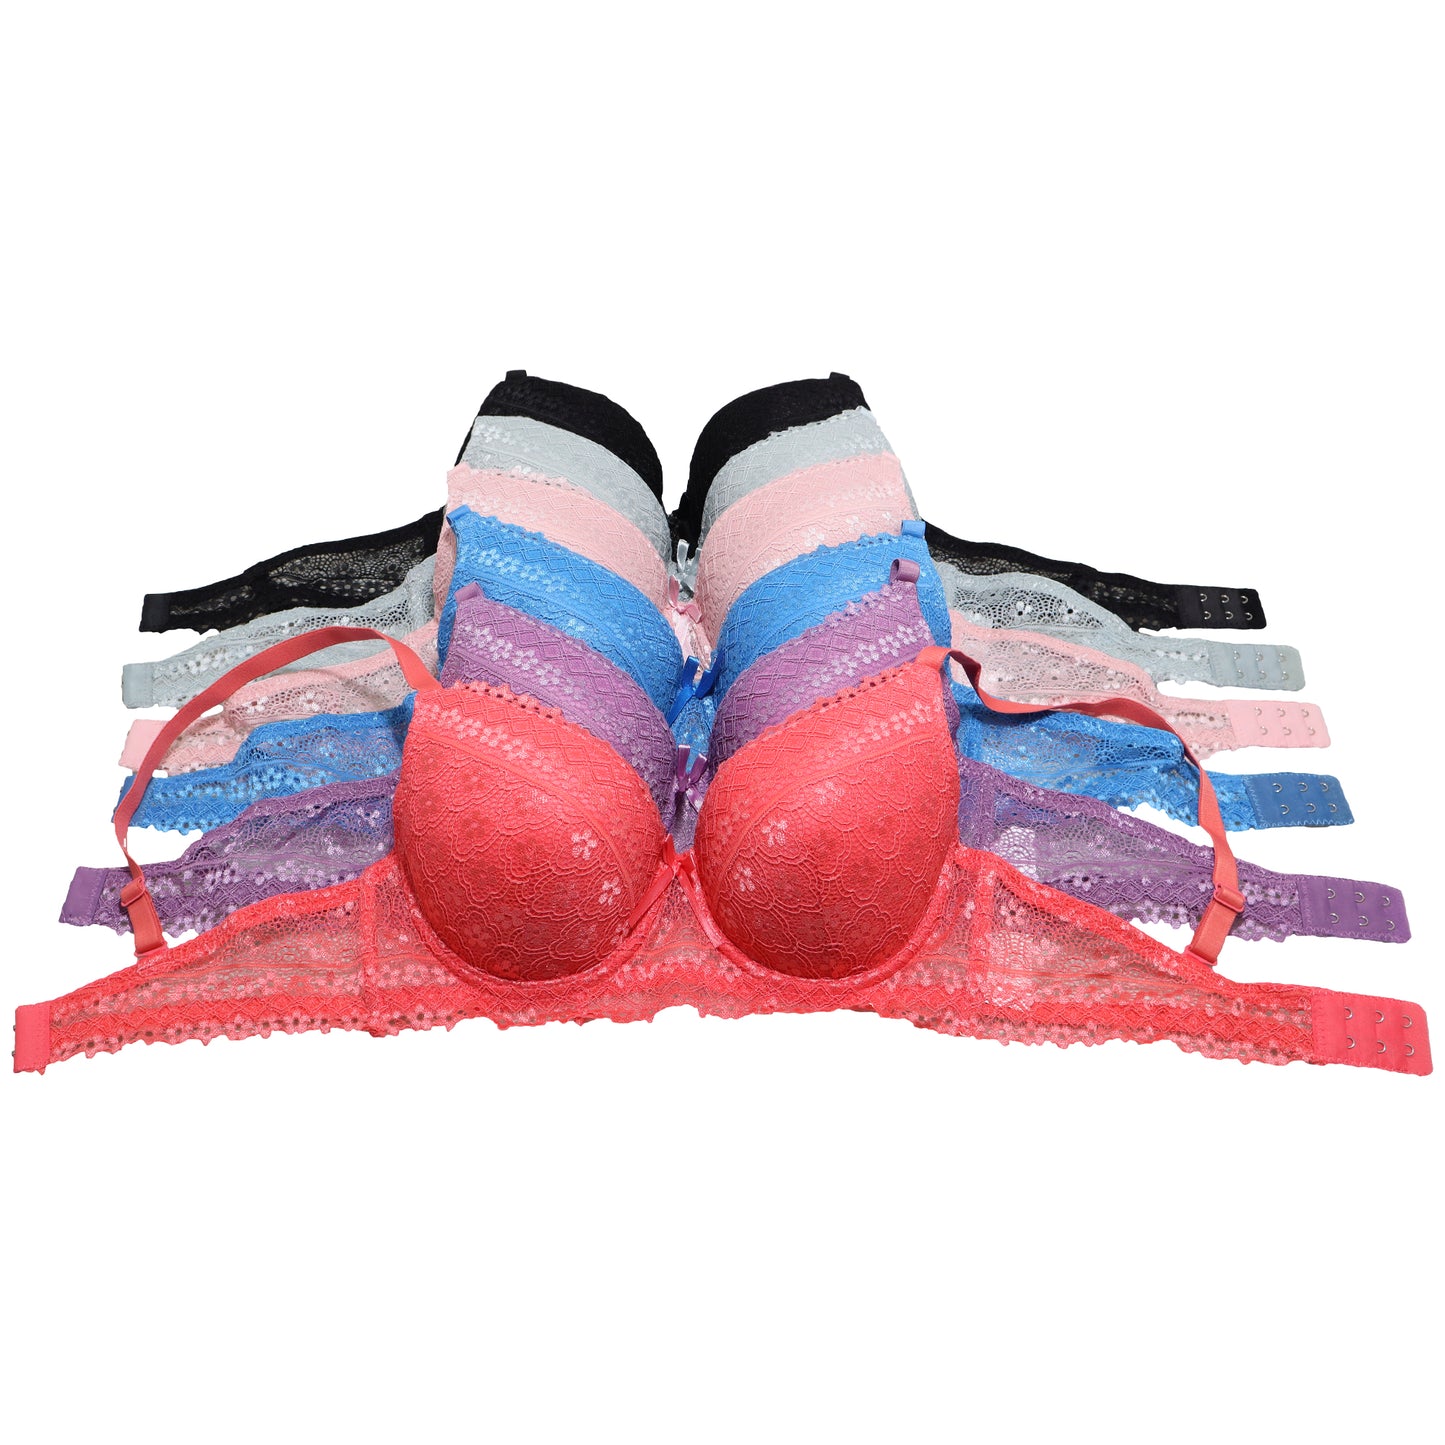 Matching Bras and Panties Set with Daisy Lace Design (6-Pack)